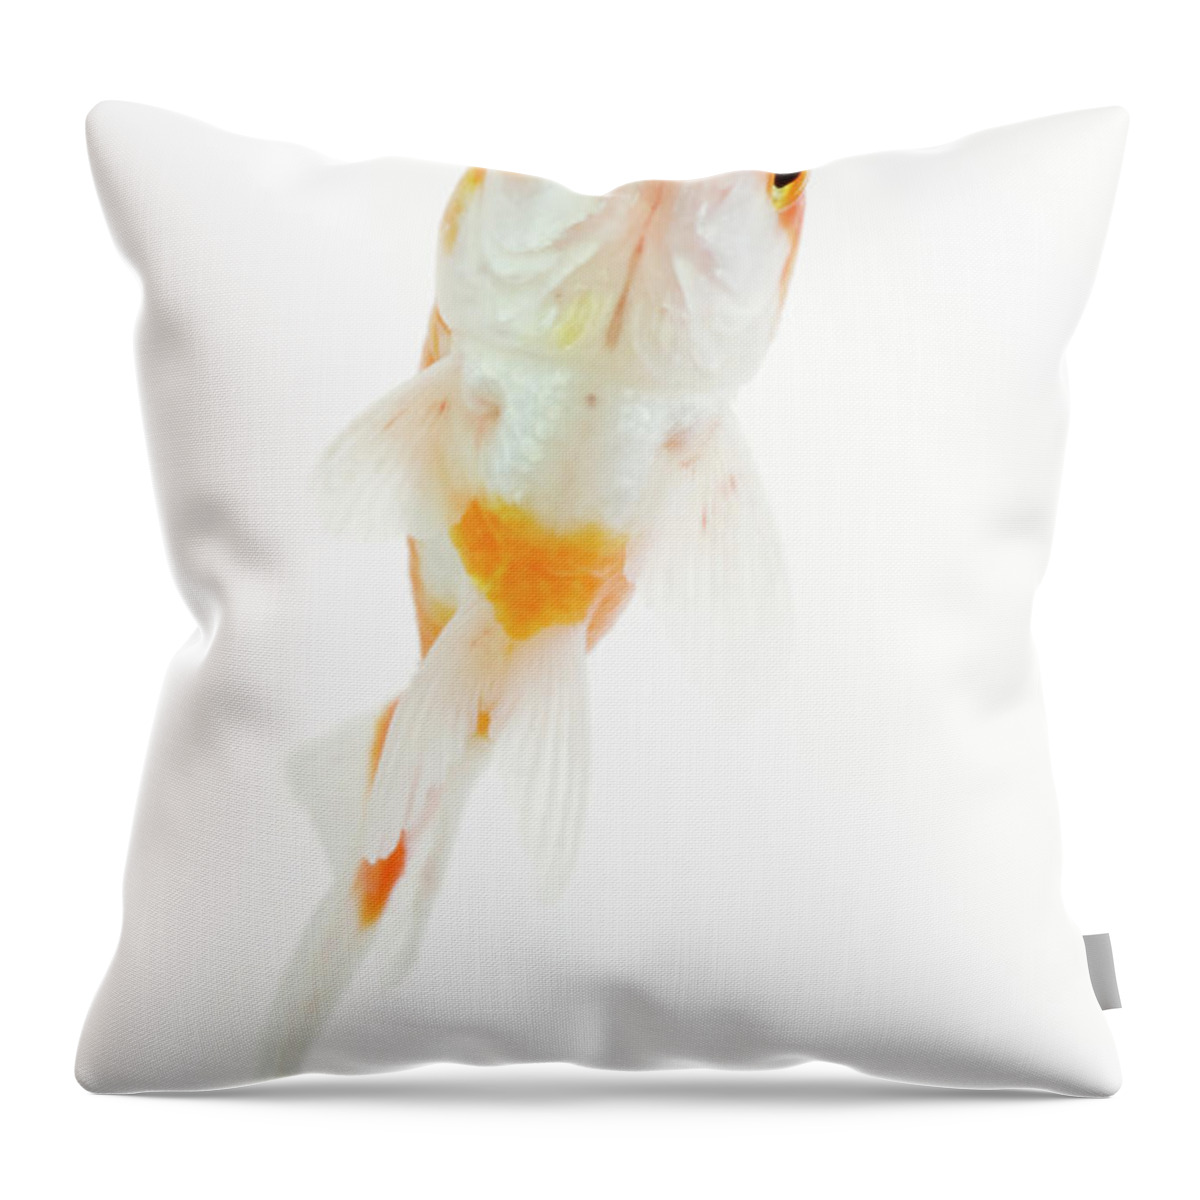 Pets Throw Pillow featuring the photograph Comet Comet-tailed Goldfish by Martin Harvey